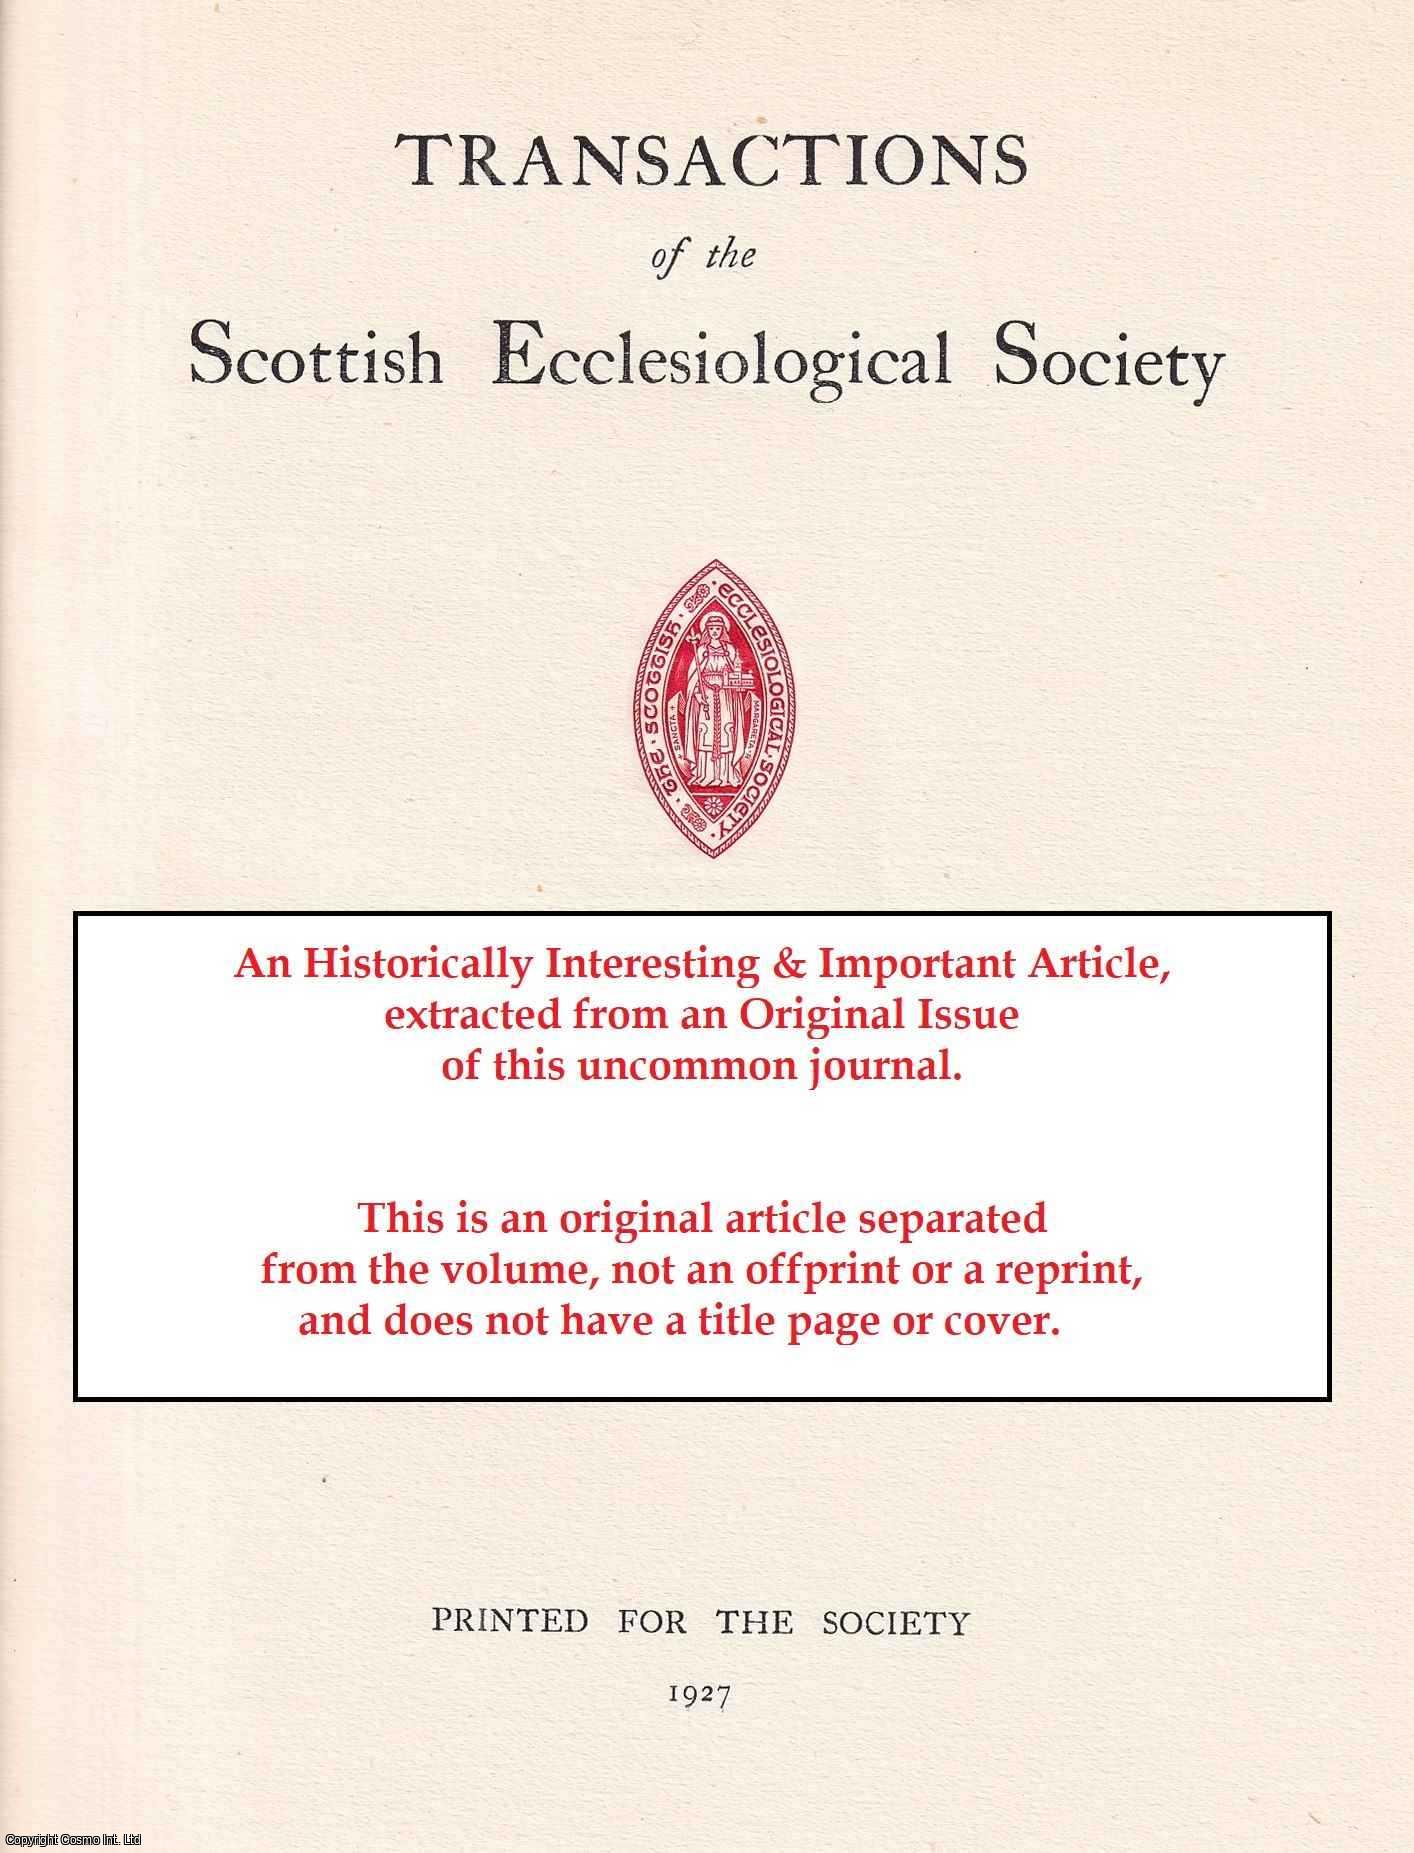 Rev James R. Burt - The Three Old Parish Kirks of North Berwick. An original article from the Transactions of the Scottish Ecclesiological Society, 1932.